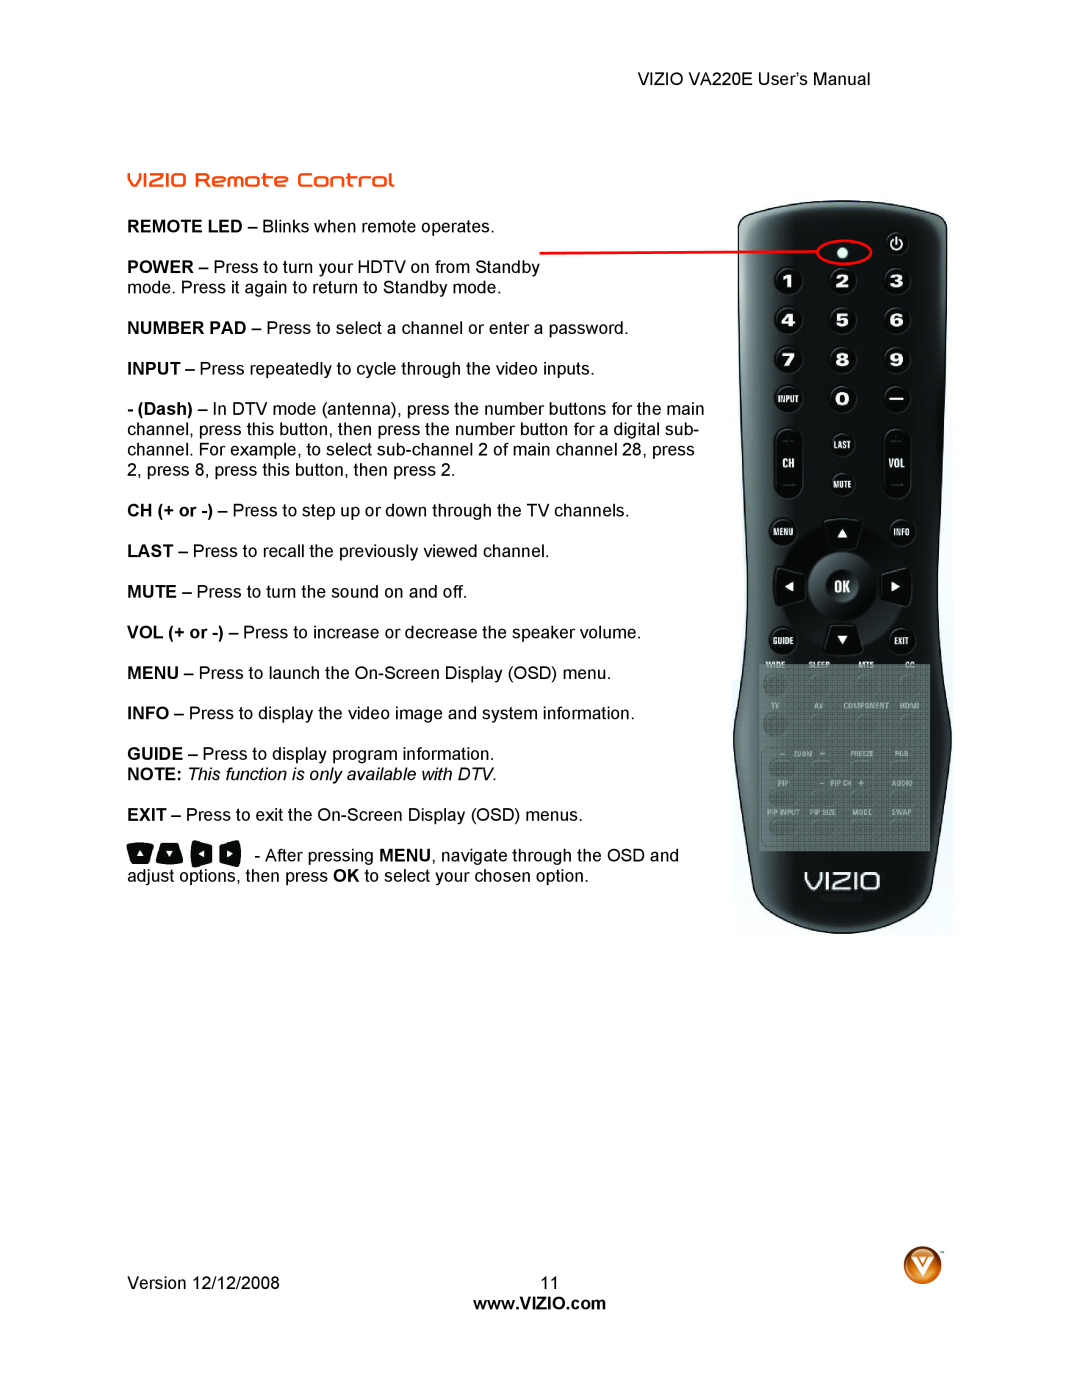 Vizio VA220E user manual VIZIO Remote Control, NOTE This function is only available with DTV 